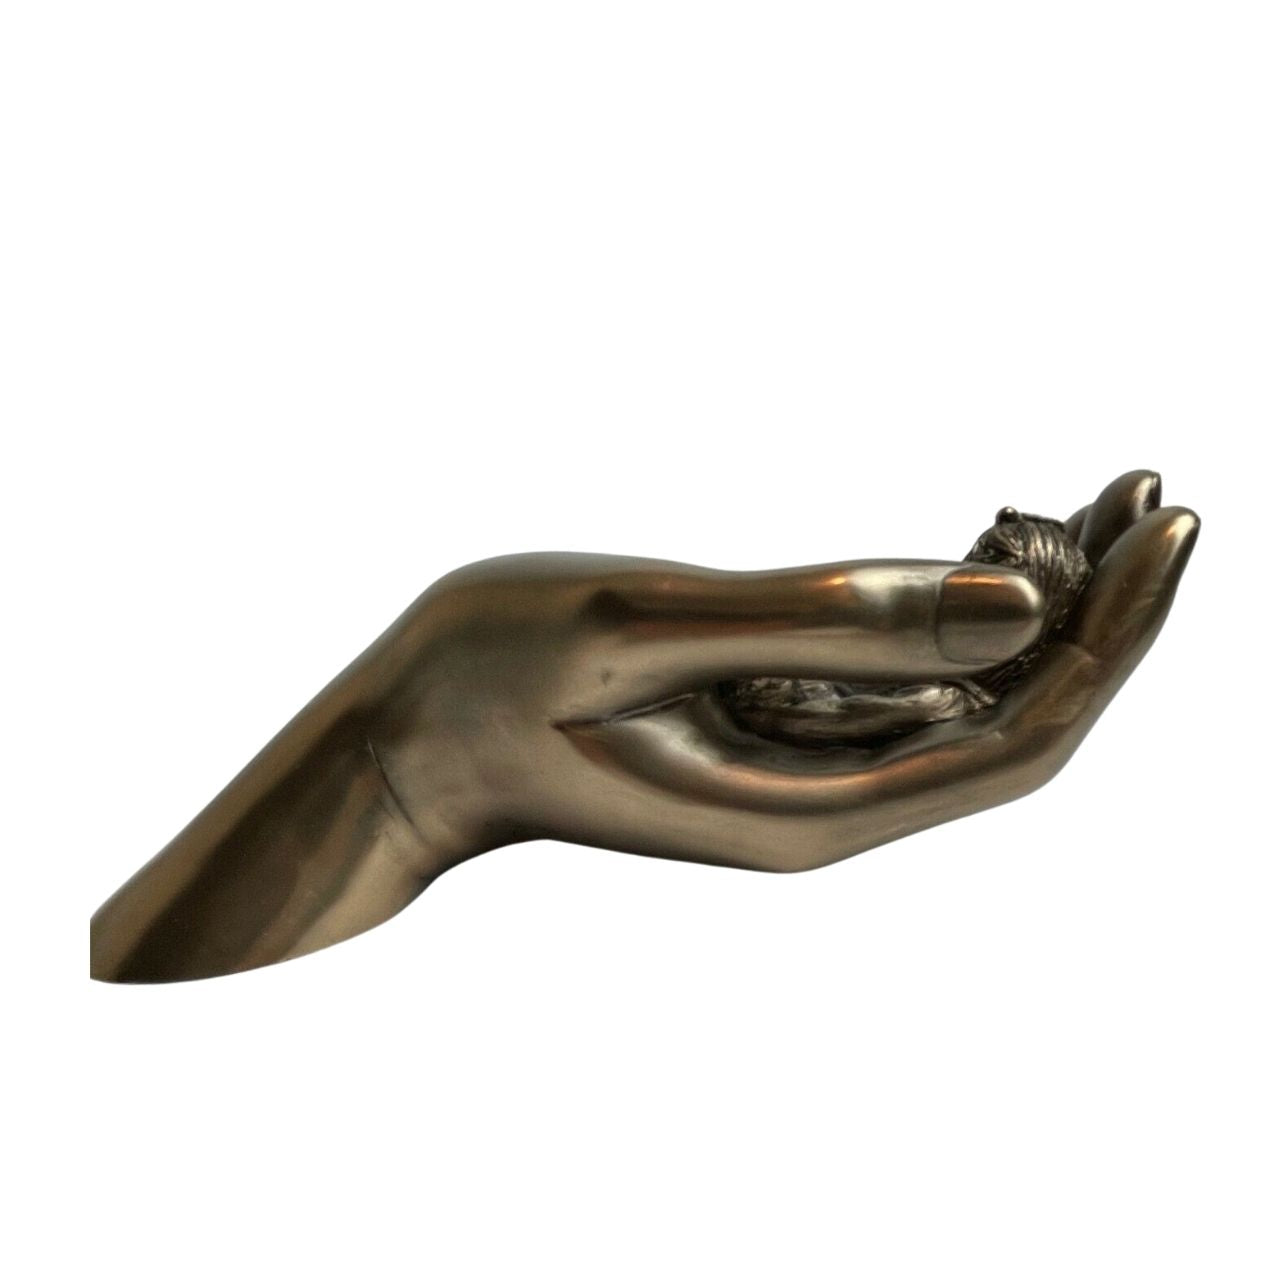 Genesis Caring Baby Girl  Beautifully crafted in cold cast bronze this wonderful baby figurine from the craftsmen of Genesis Fine Arts depicts the sleeping baby girl carefully curled up in a mothers caring hand.